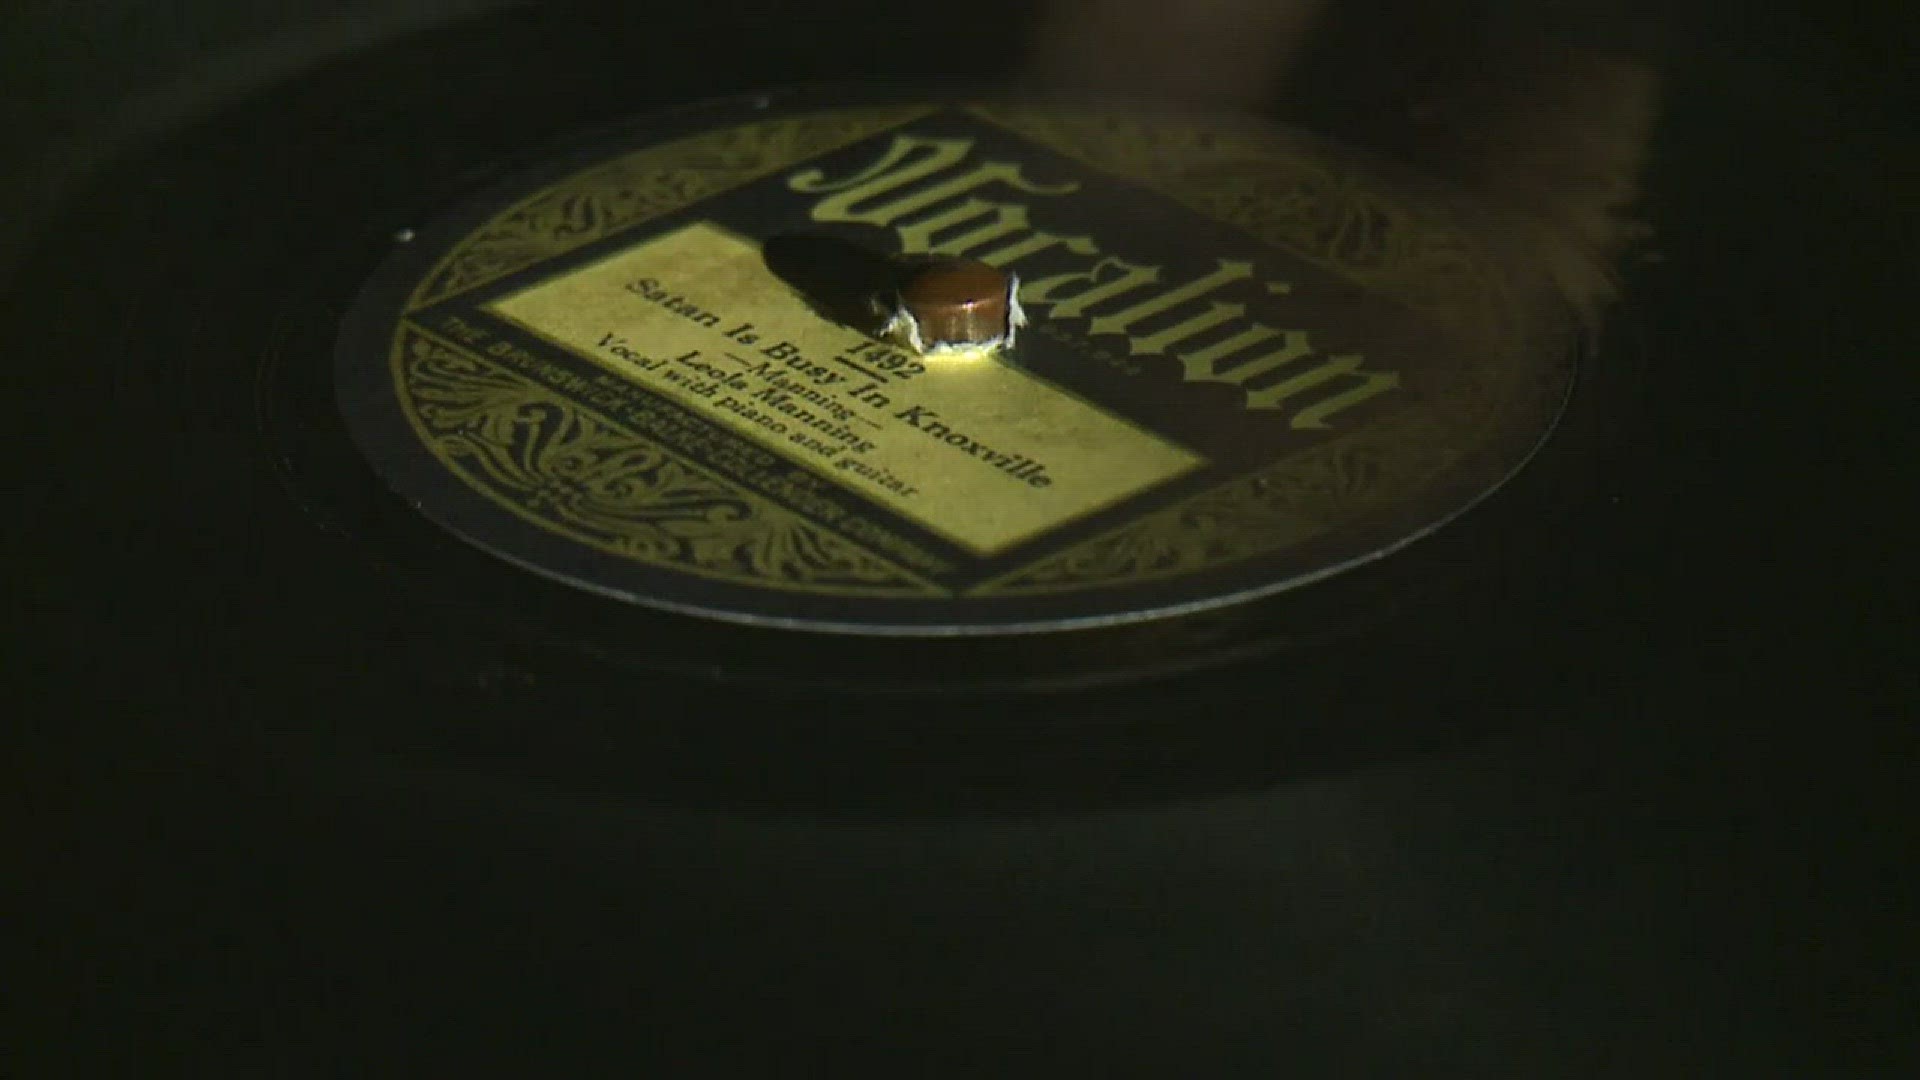 May 5, 2016: More than a dozen years of painstaking research and old record restorations have permanently preserved Knoxville's role in music history with more than 100 diverse musical performances during the St. James Sessions in 1929 and 1930.